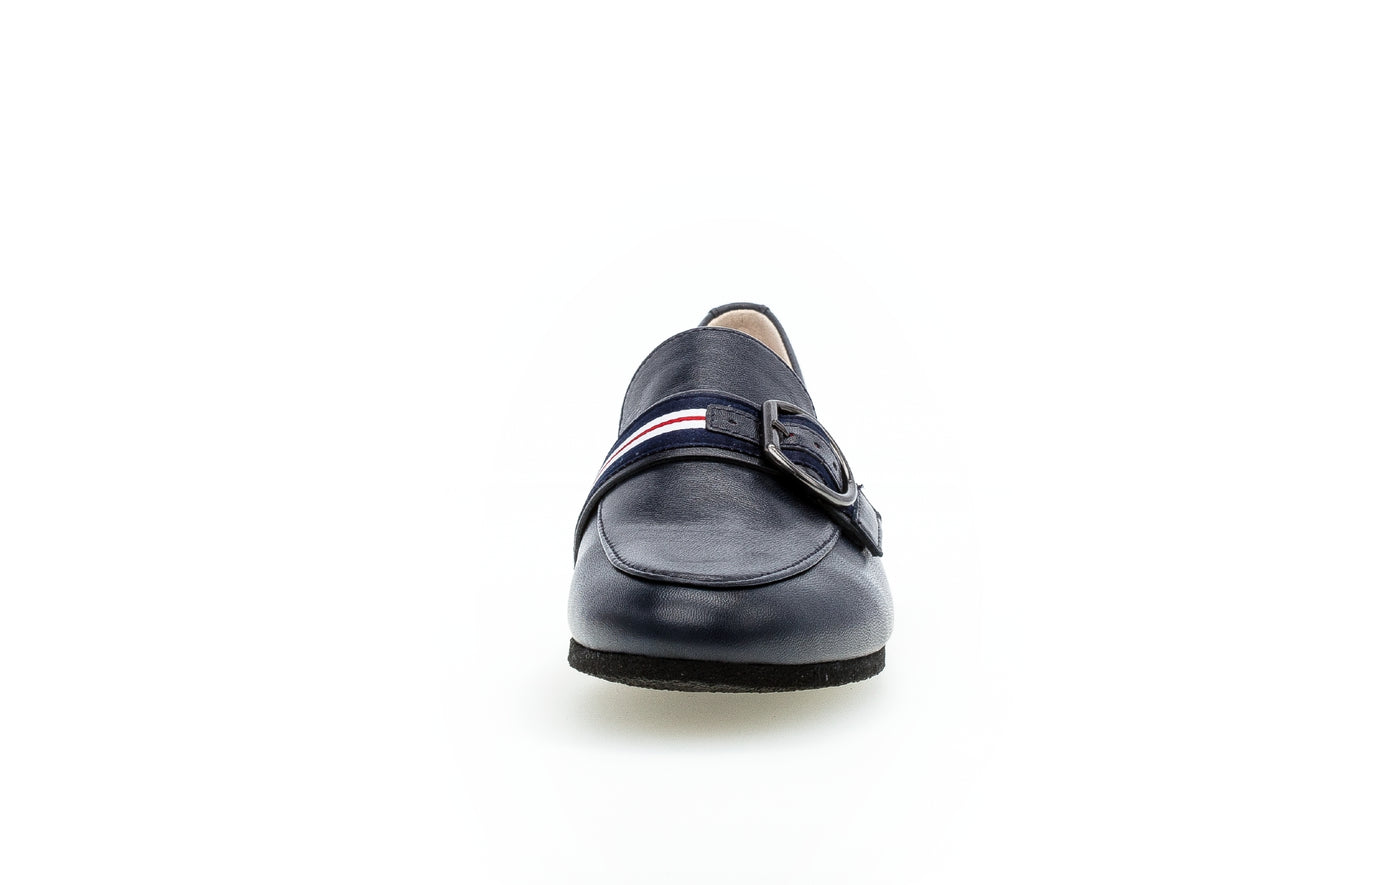 GABOR - 42.433.26 LOW HEEL LOAFER - NAVY LEATHER